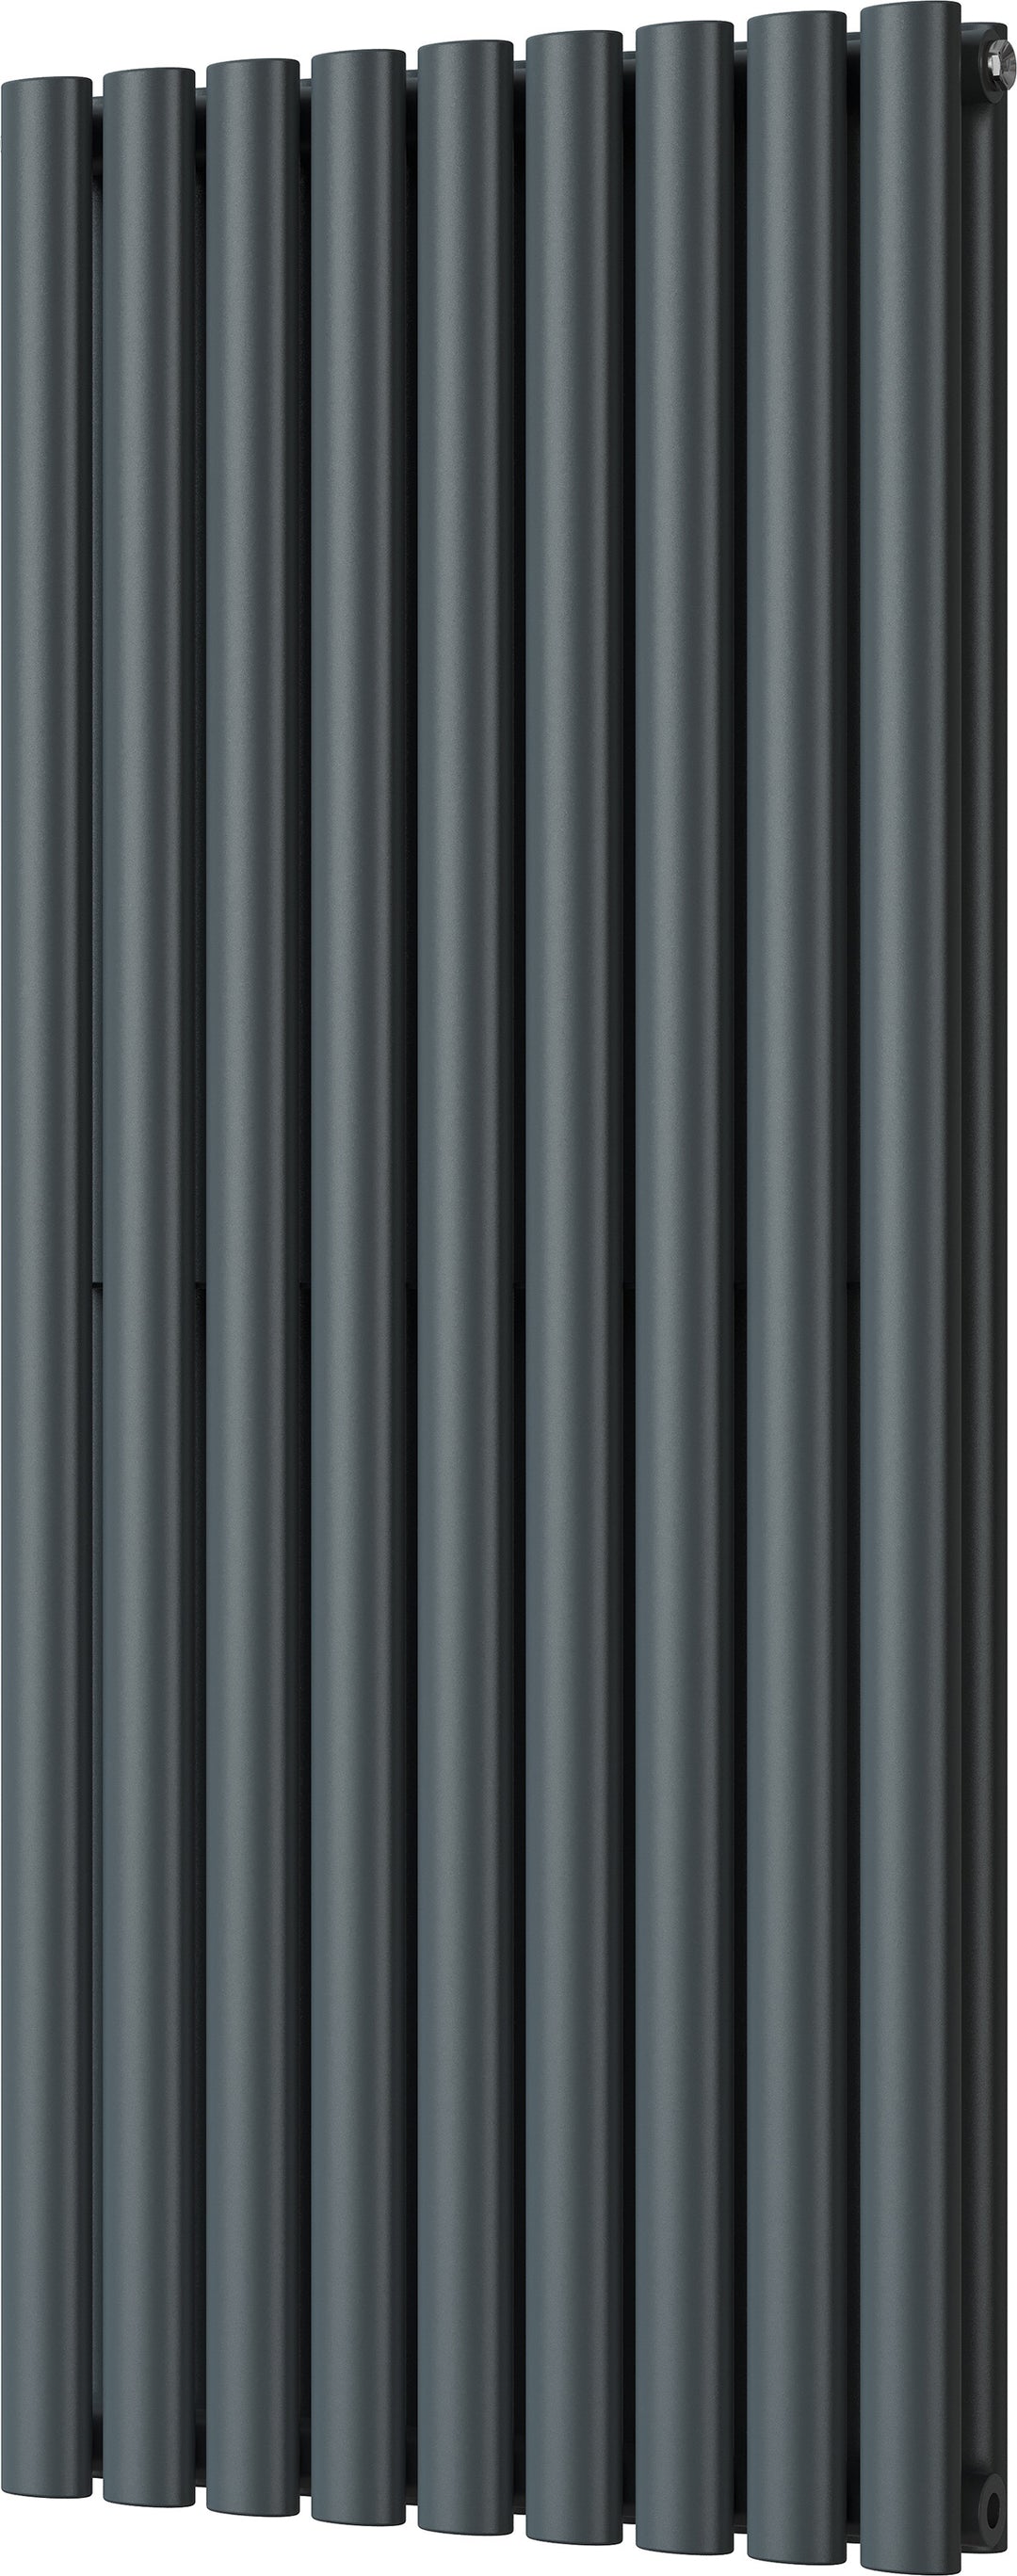 Omeara - Anthracite Vertical Radiator H1200mm x W522mm Double Panel